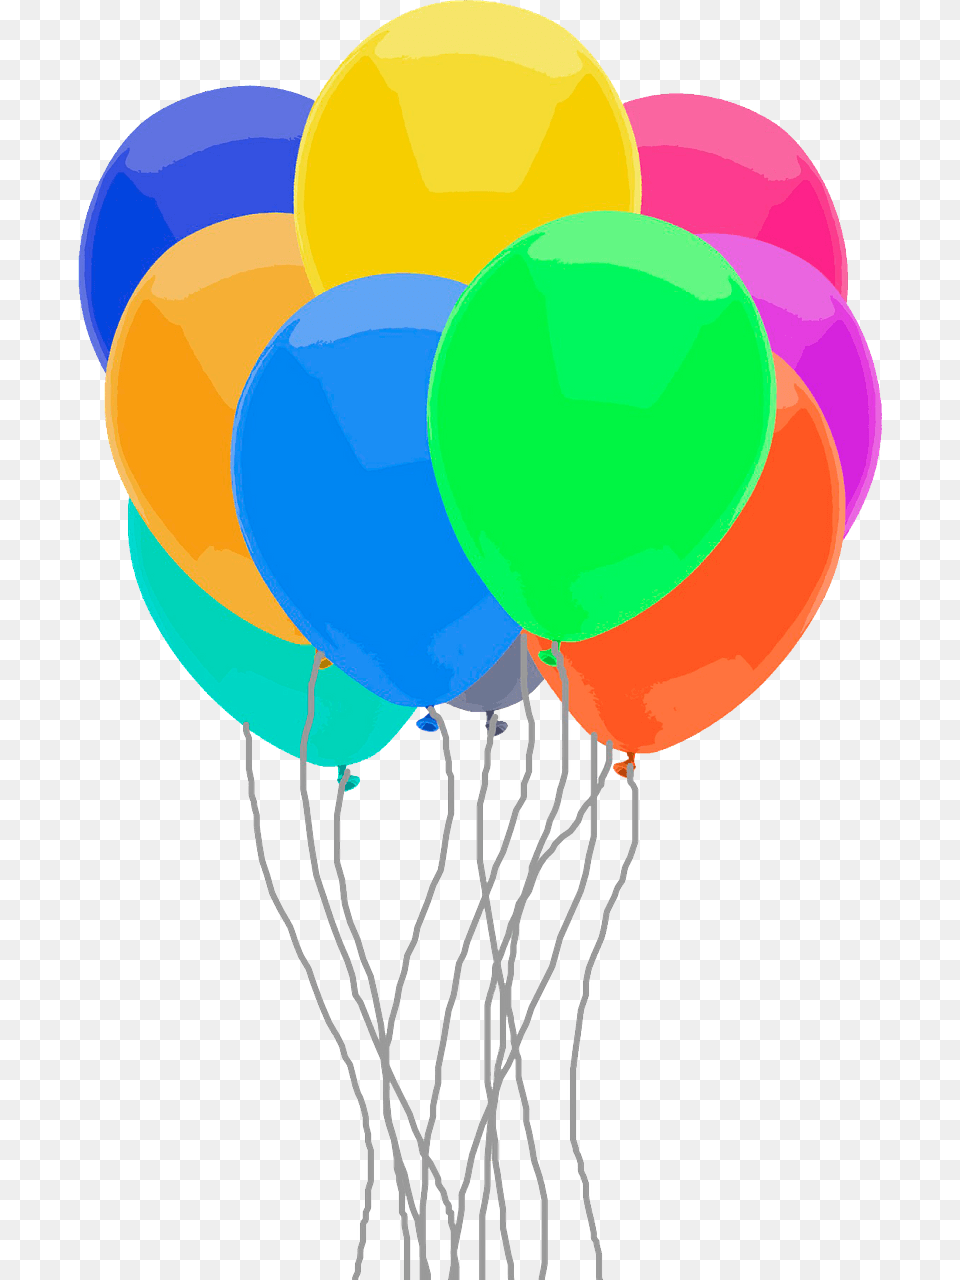 Multicolored Balloons Clipart, Balloon Png